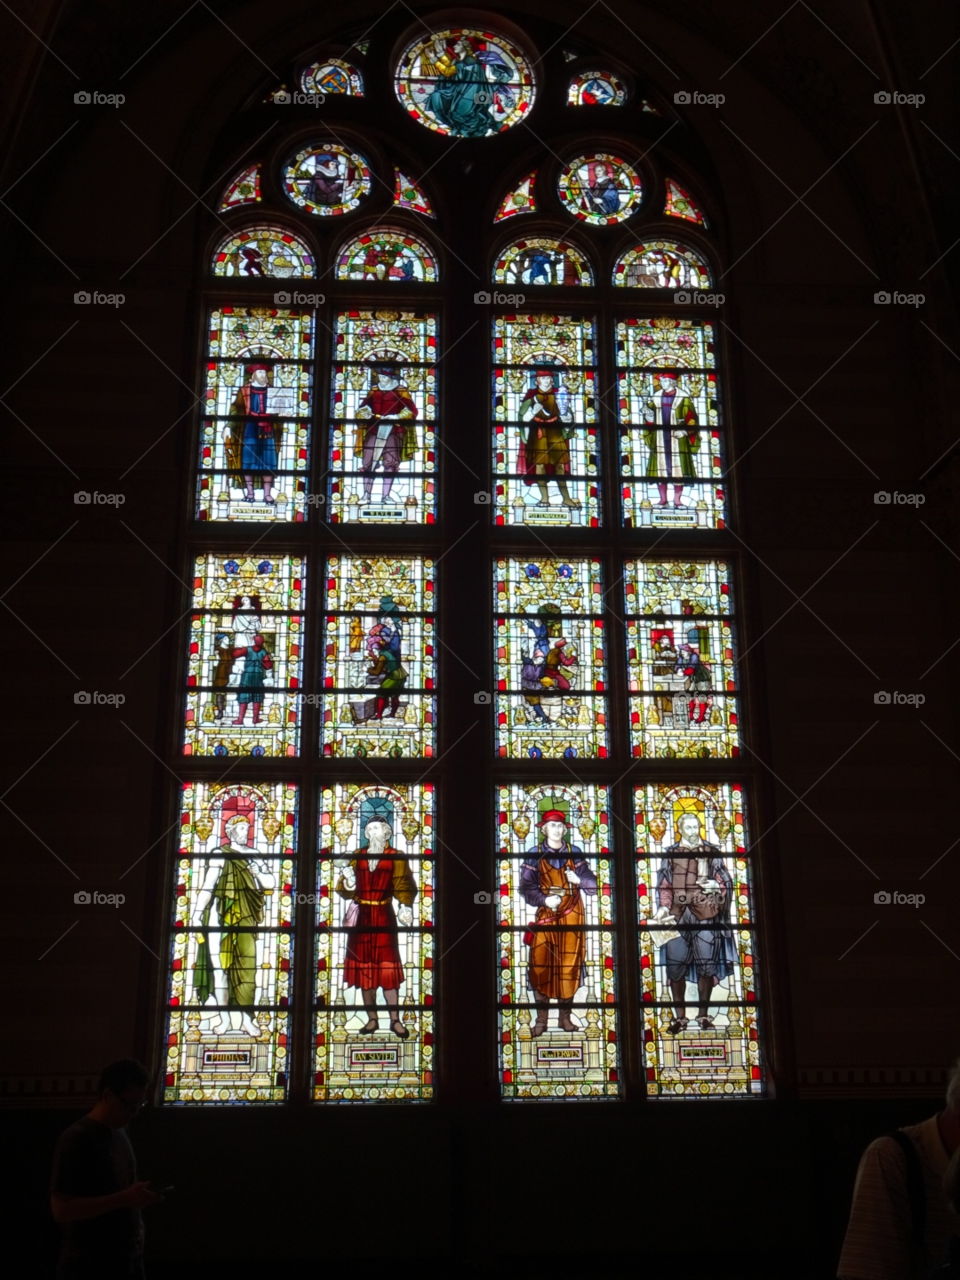 Stained Glass Windows at the Rijksmuseum Ansterdam